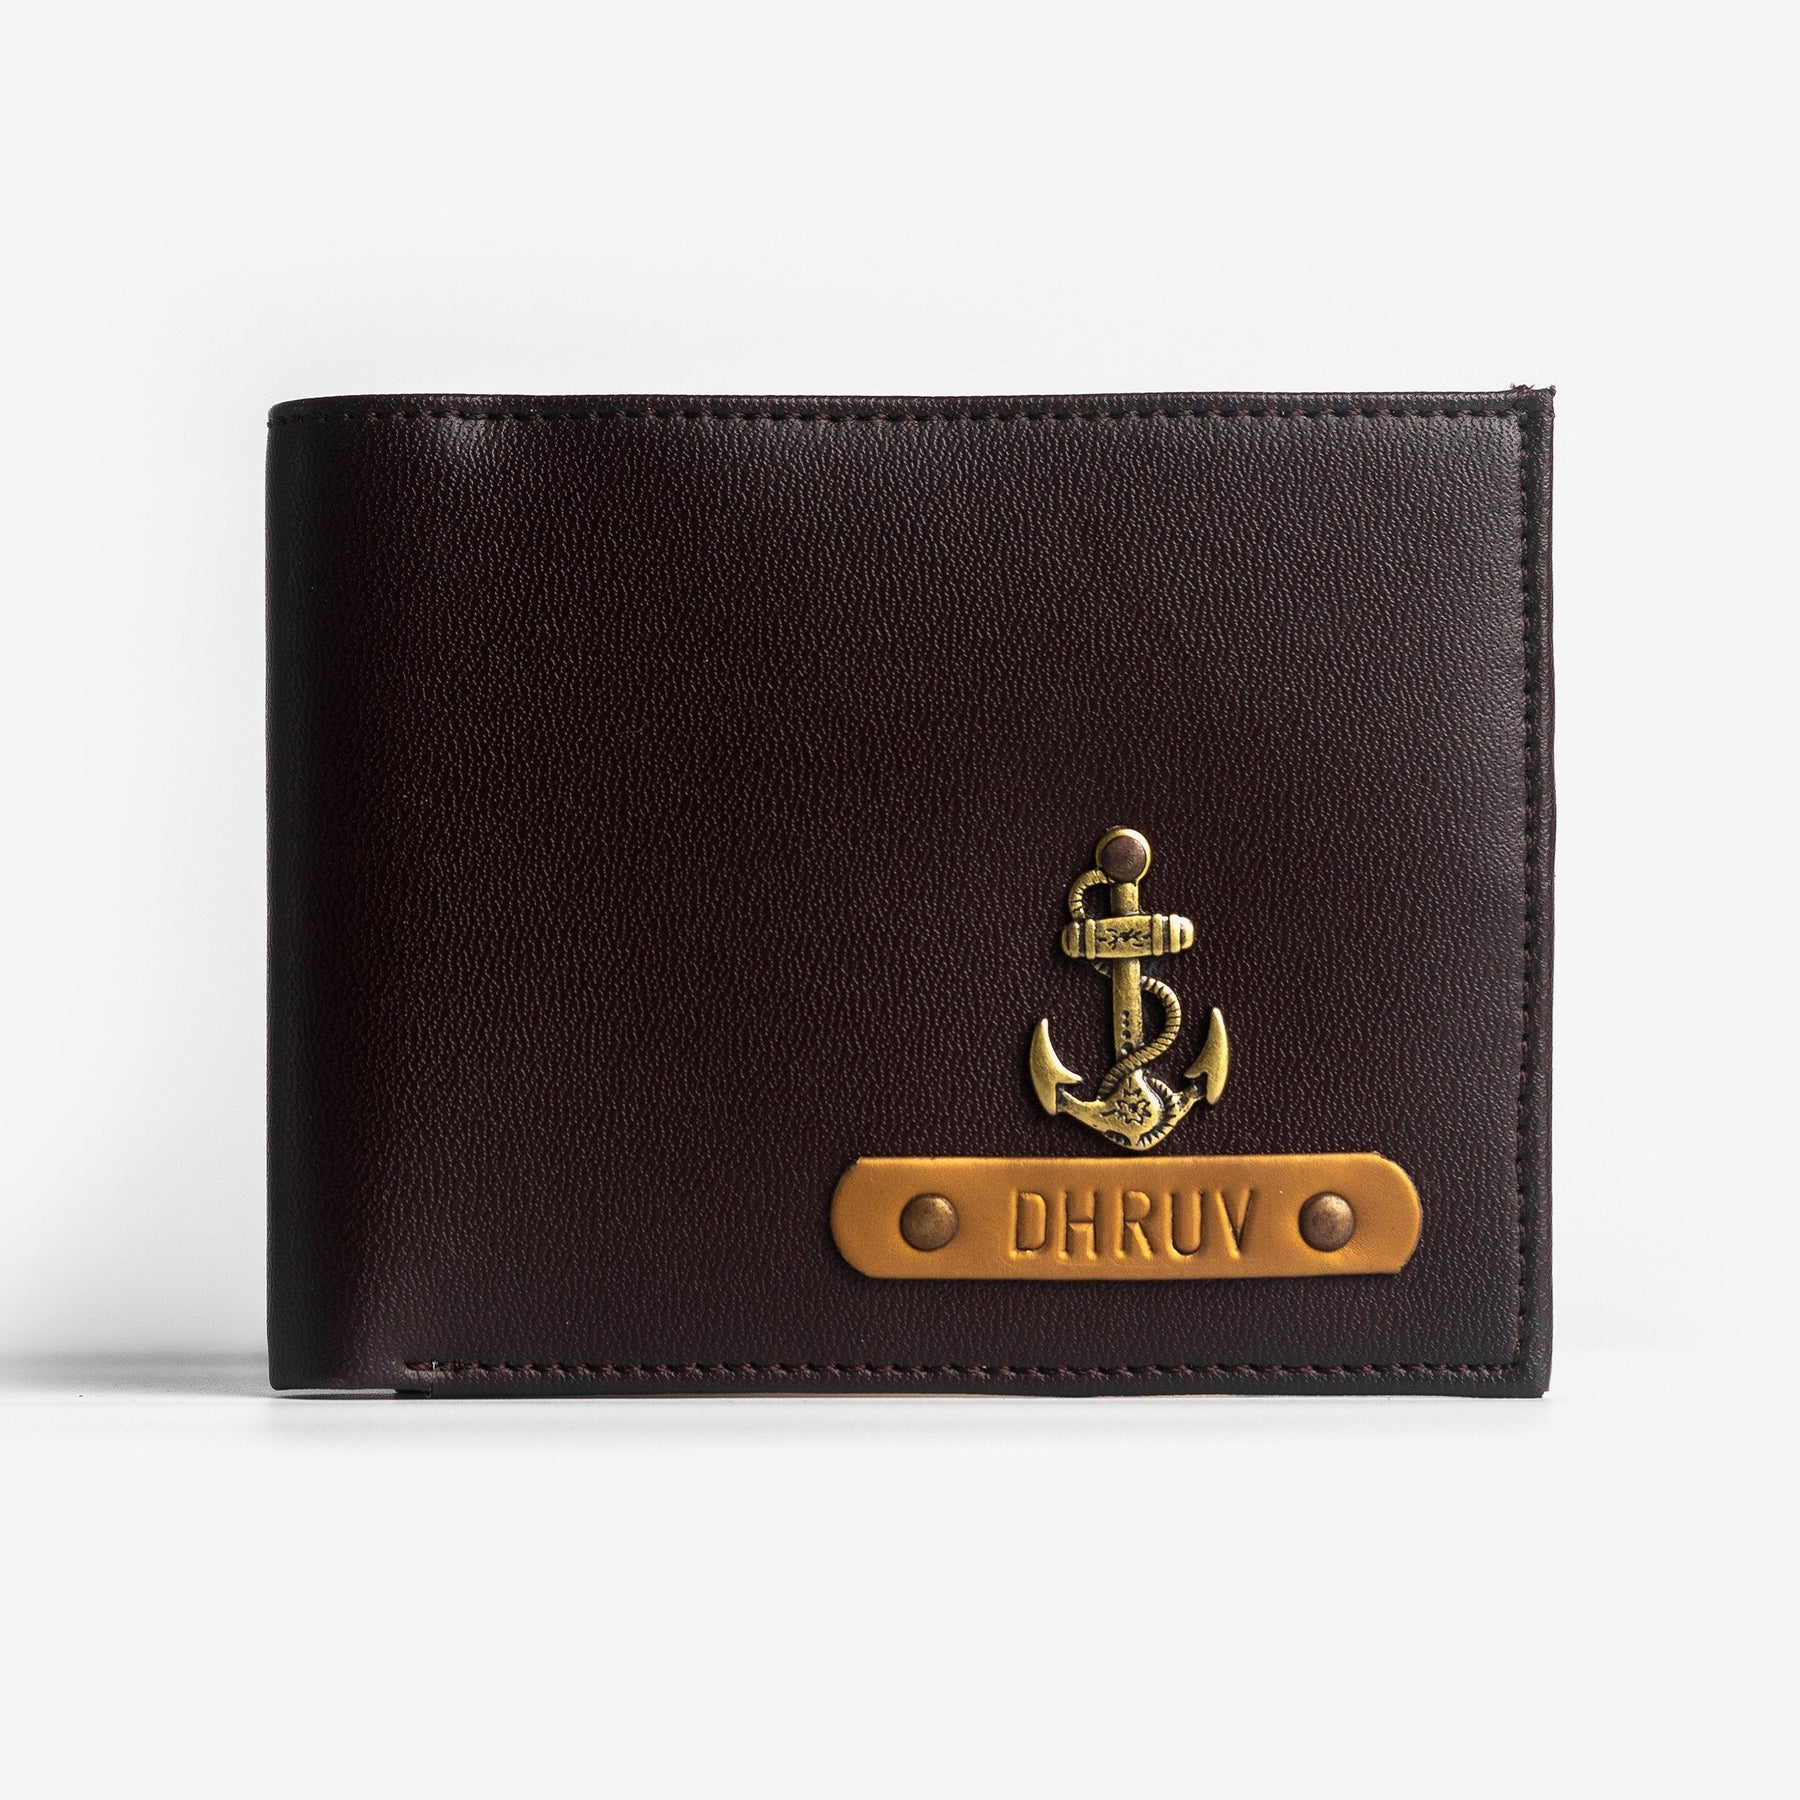 The Messy Corner Mens Wallet Personalised Mens Wallet with Charm - Chocolate Brown